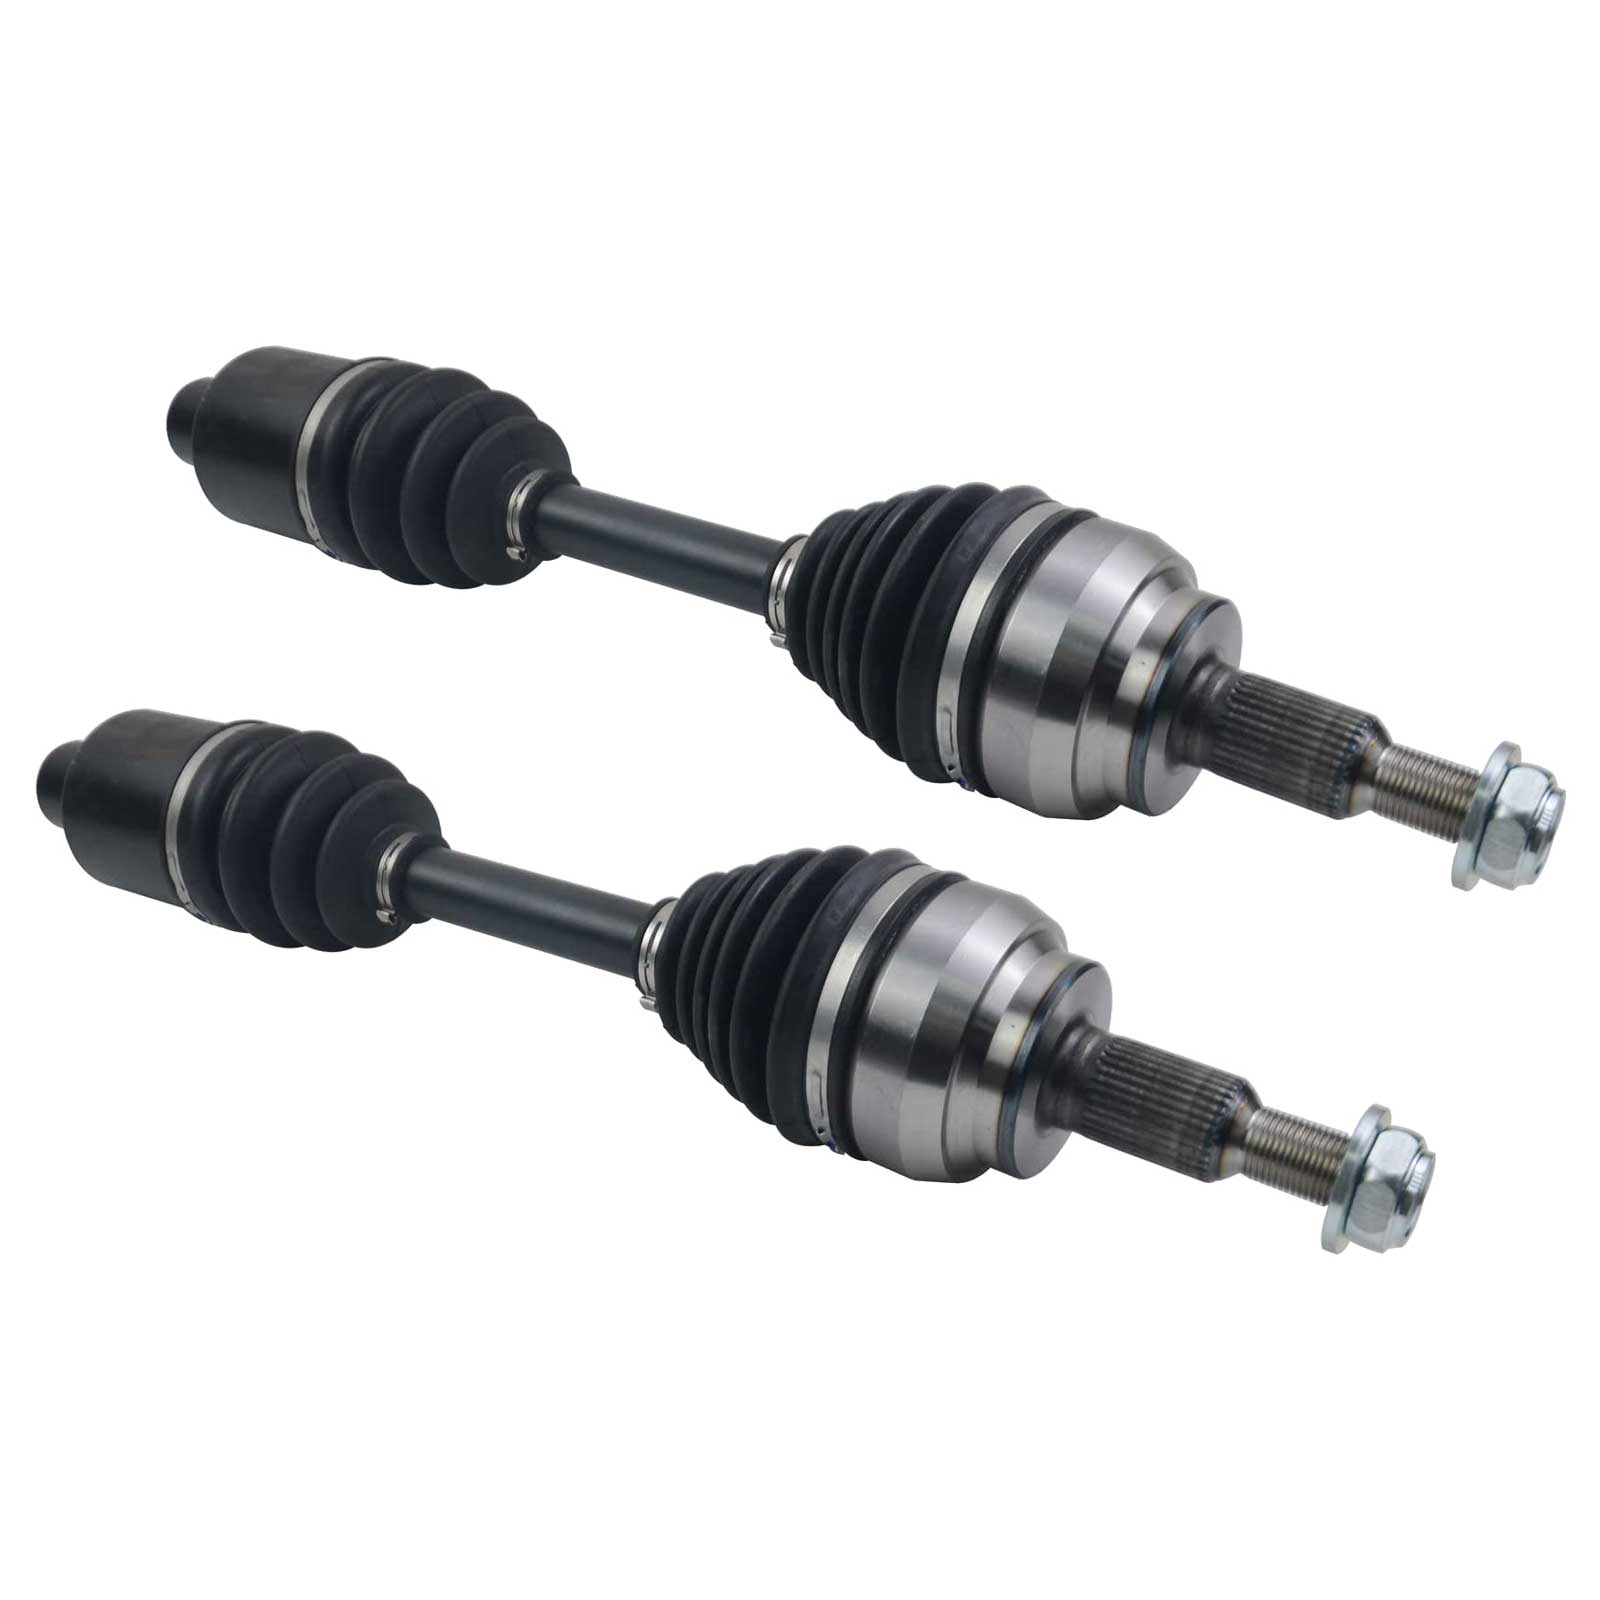 For Dodge Ram 1500 4WD 2002-2005 Pair of Front CV Axle Shafts Set ...